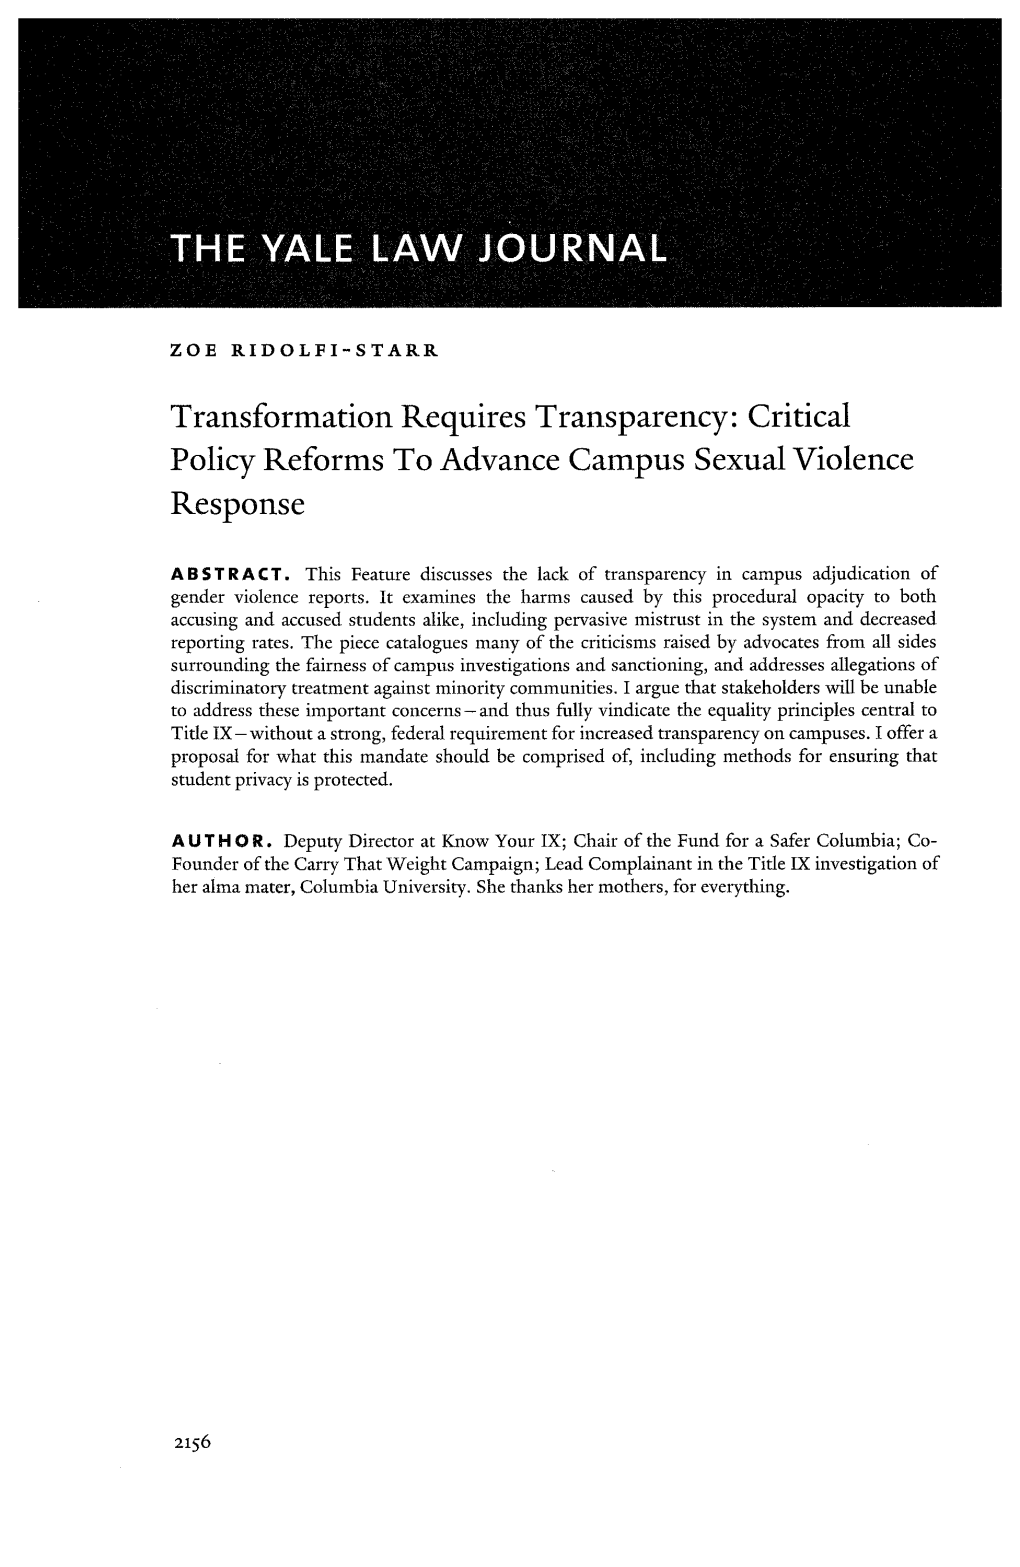 Critical Policy Reforms to Advance Campus Sexual Violence Response